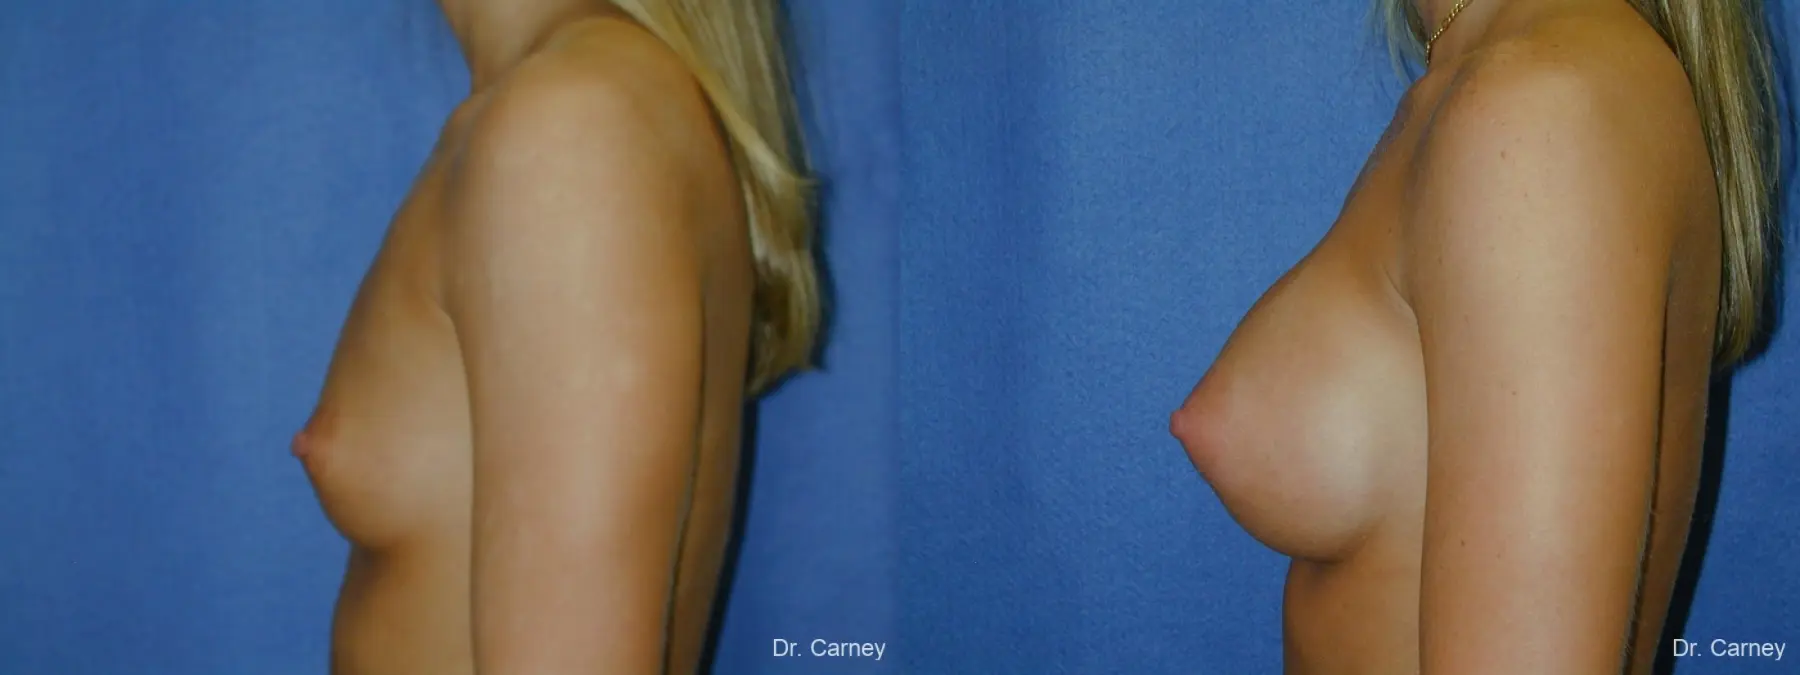 Virginia Beach Breast Augmentation 1080 - Before and After